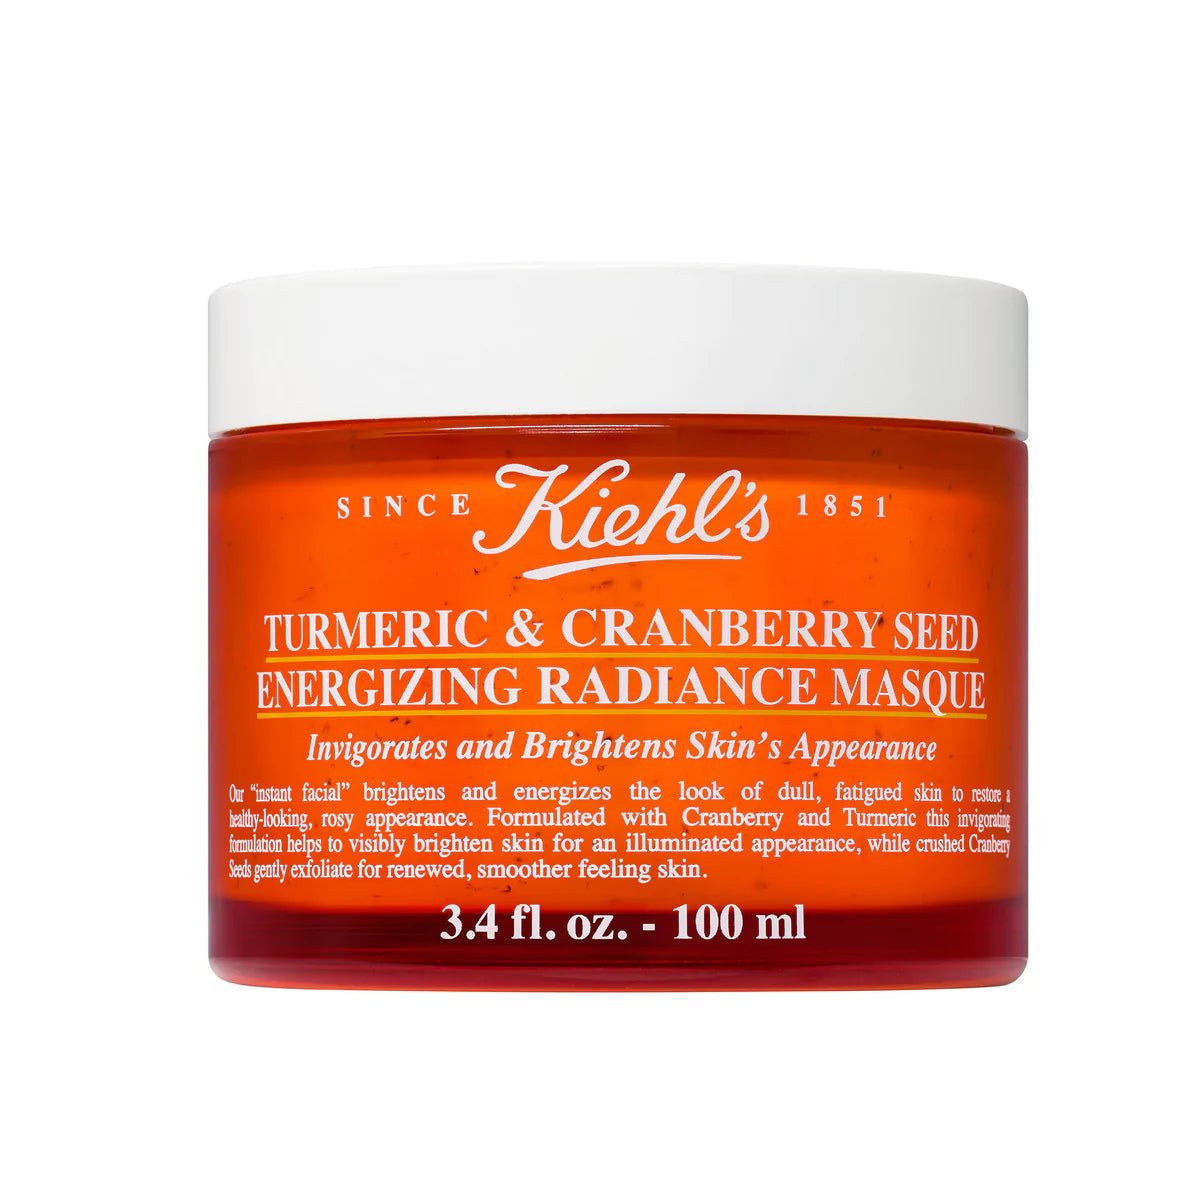 Kiehl's Turmeric and Cranberry Seed Energizing Radiance Masque Mask 100Ml - AllurebeautypkKiehl's Turmeric and Cranberry Seed Energizing Radiance Masque Mask 100Ml